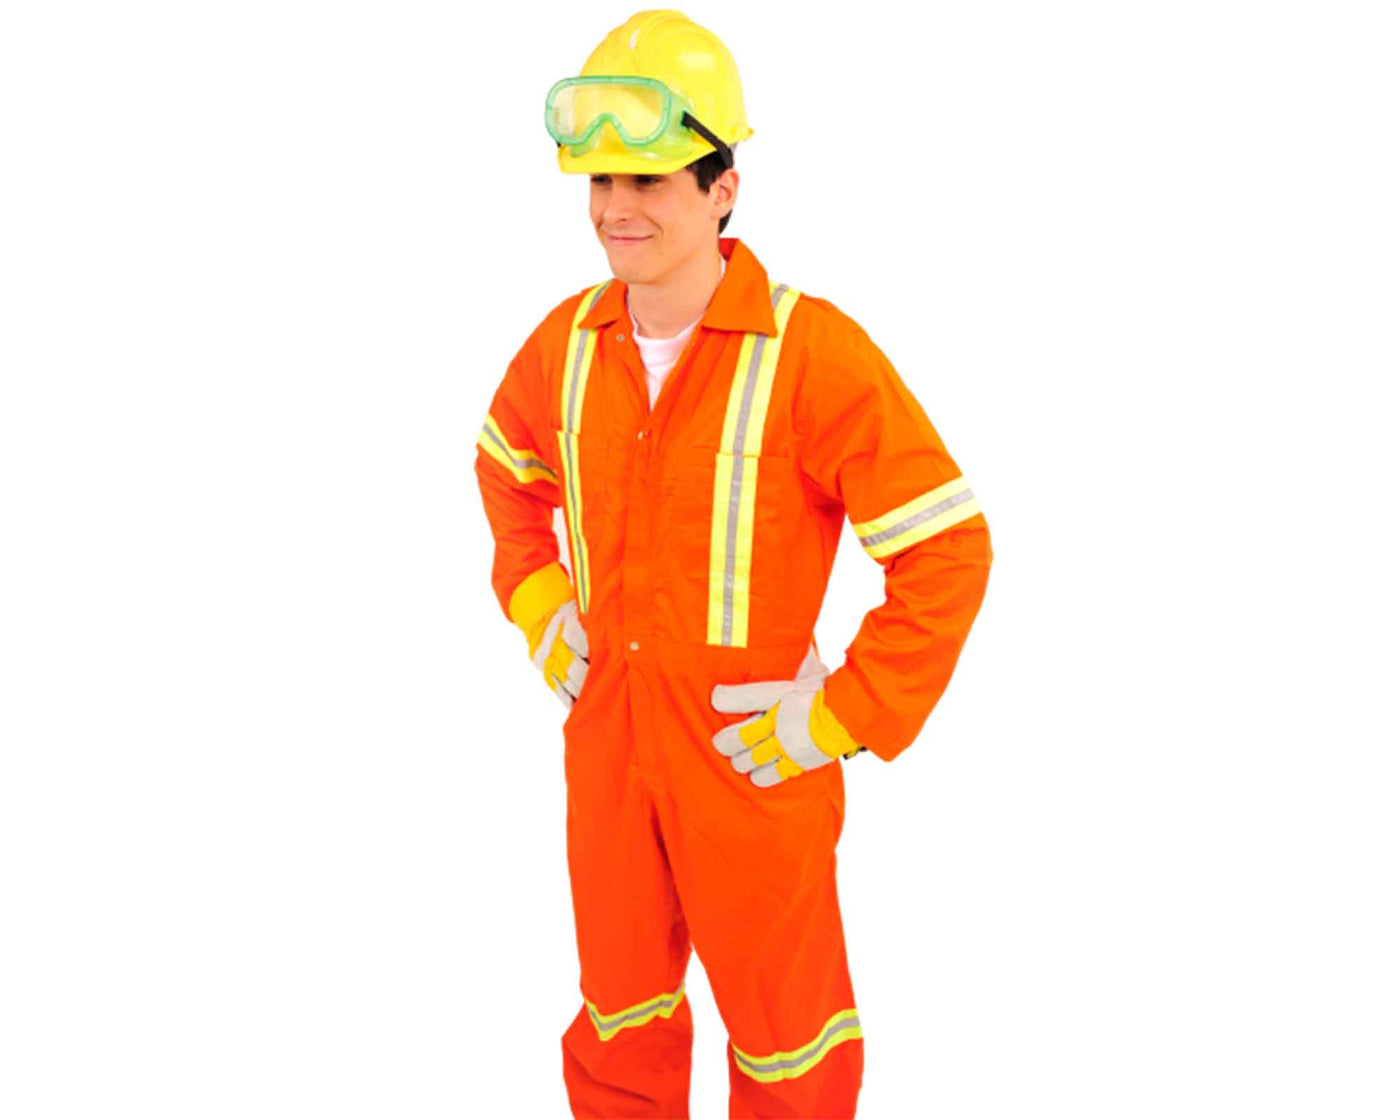 side view of man wearing industrial orange coverall with reflective stripe with yellow safety hat on his head